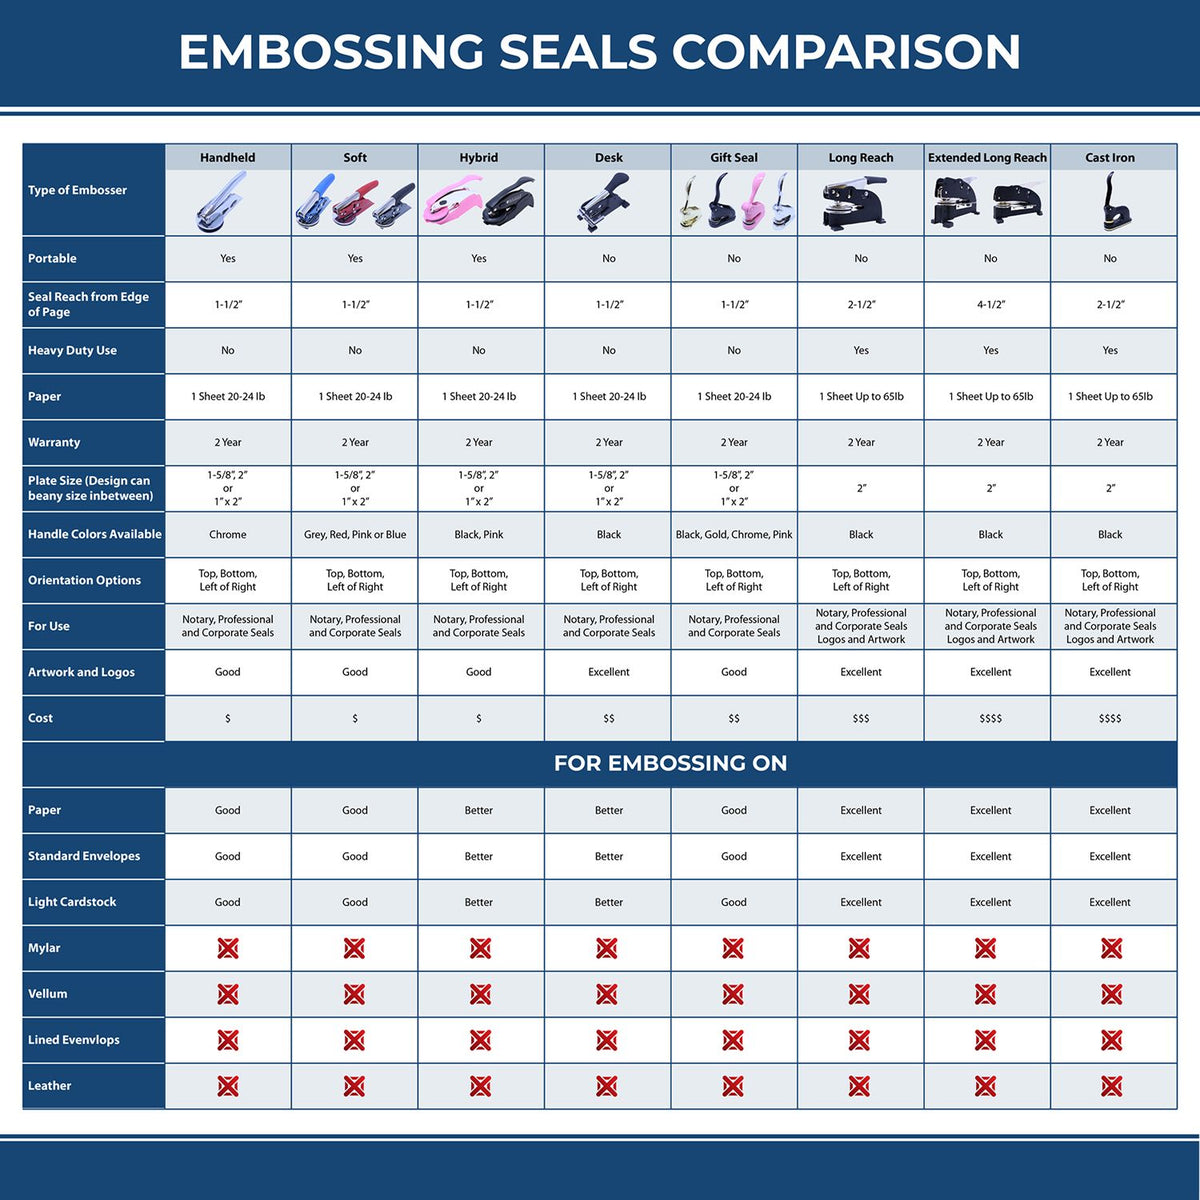 A comparison chart for the different types of mount models available for the Soft Florida Professional Geologist Seal